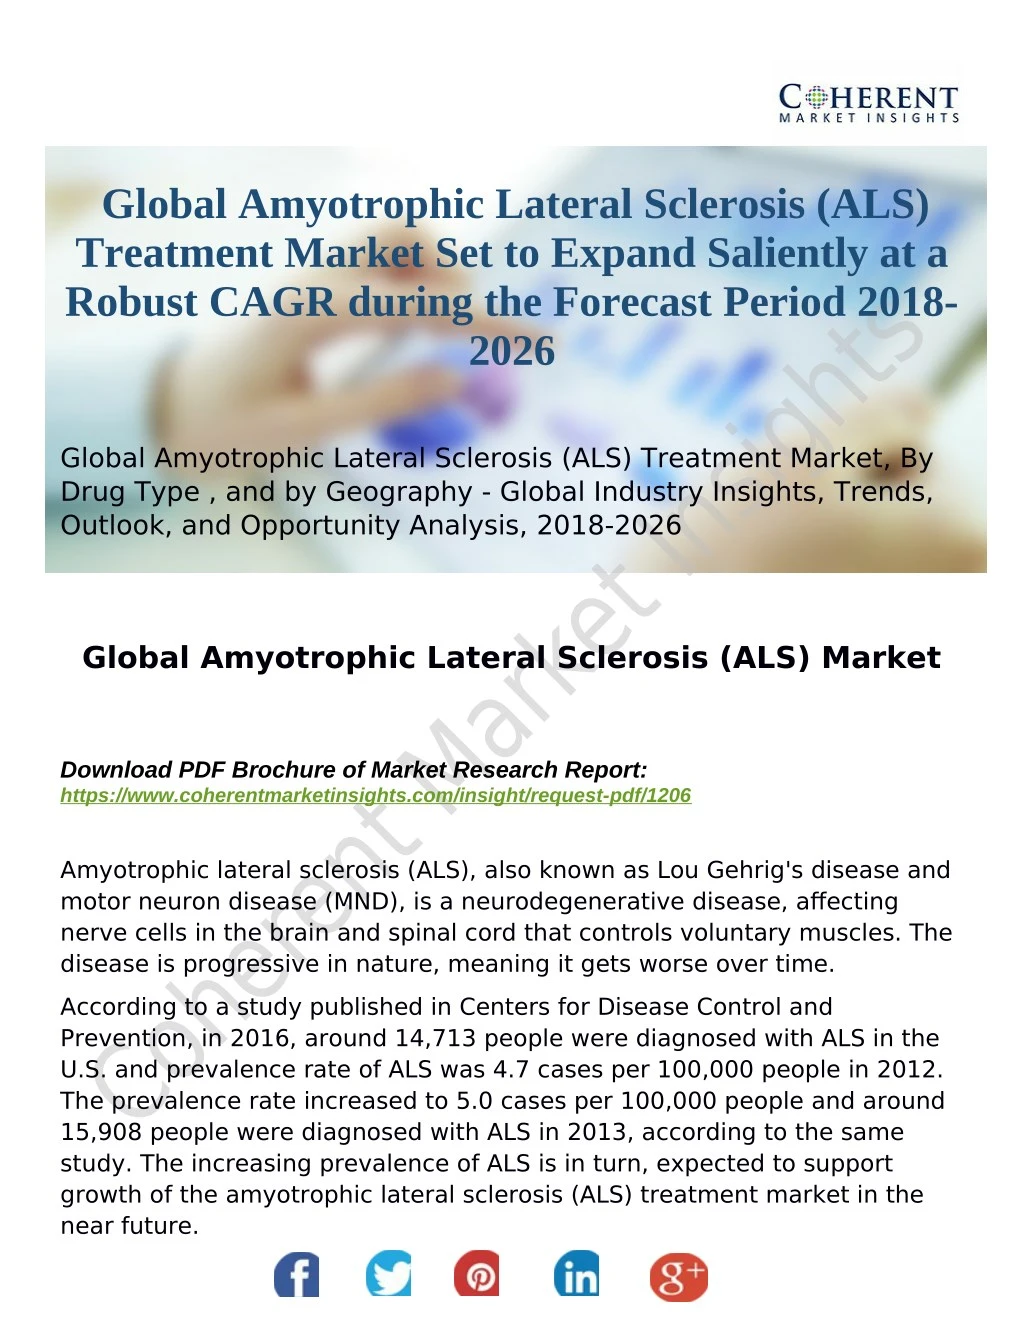 global amyotrophic lateral sclerosis